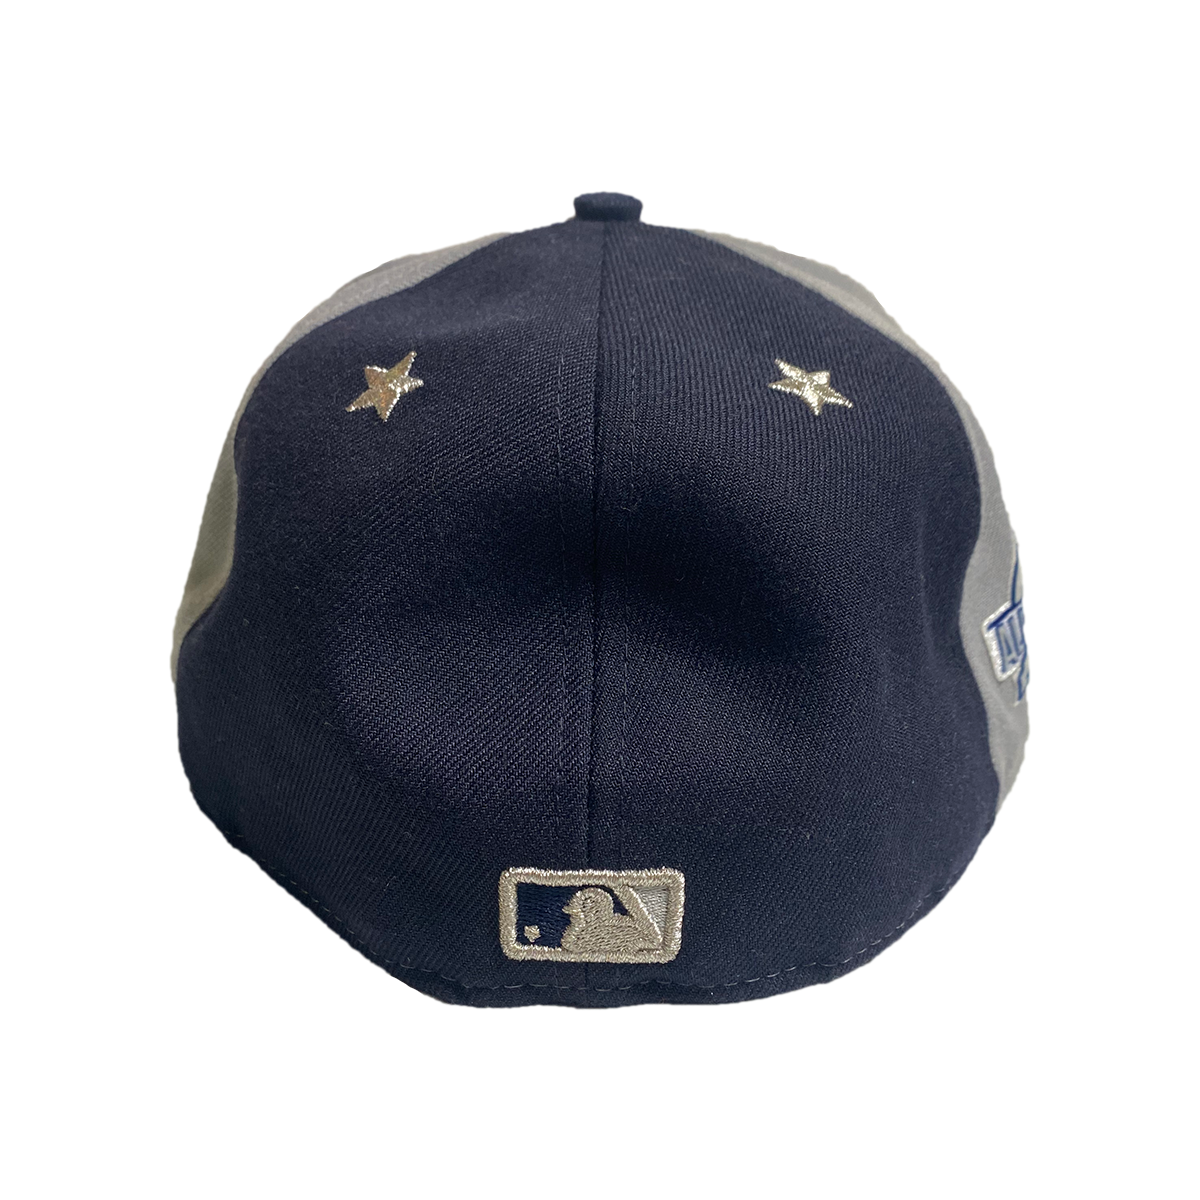 NAVY, WHITE & GREY EMBROIDERED YANKEES CLAW FITTED HAT